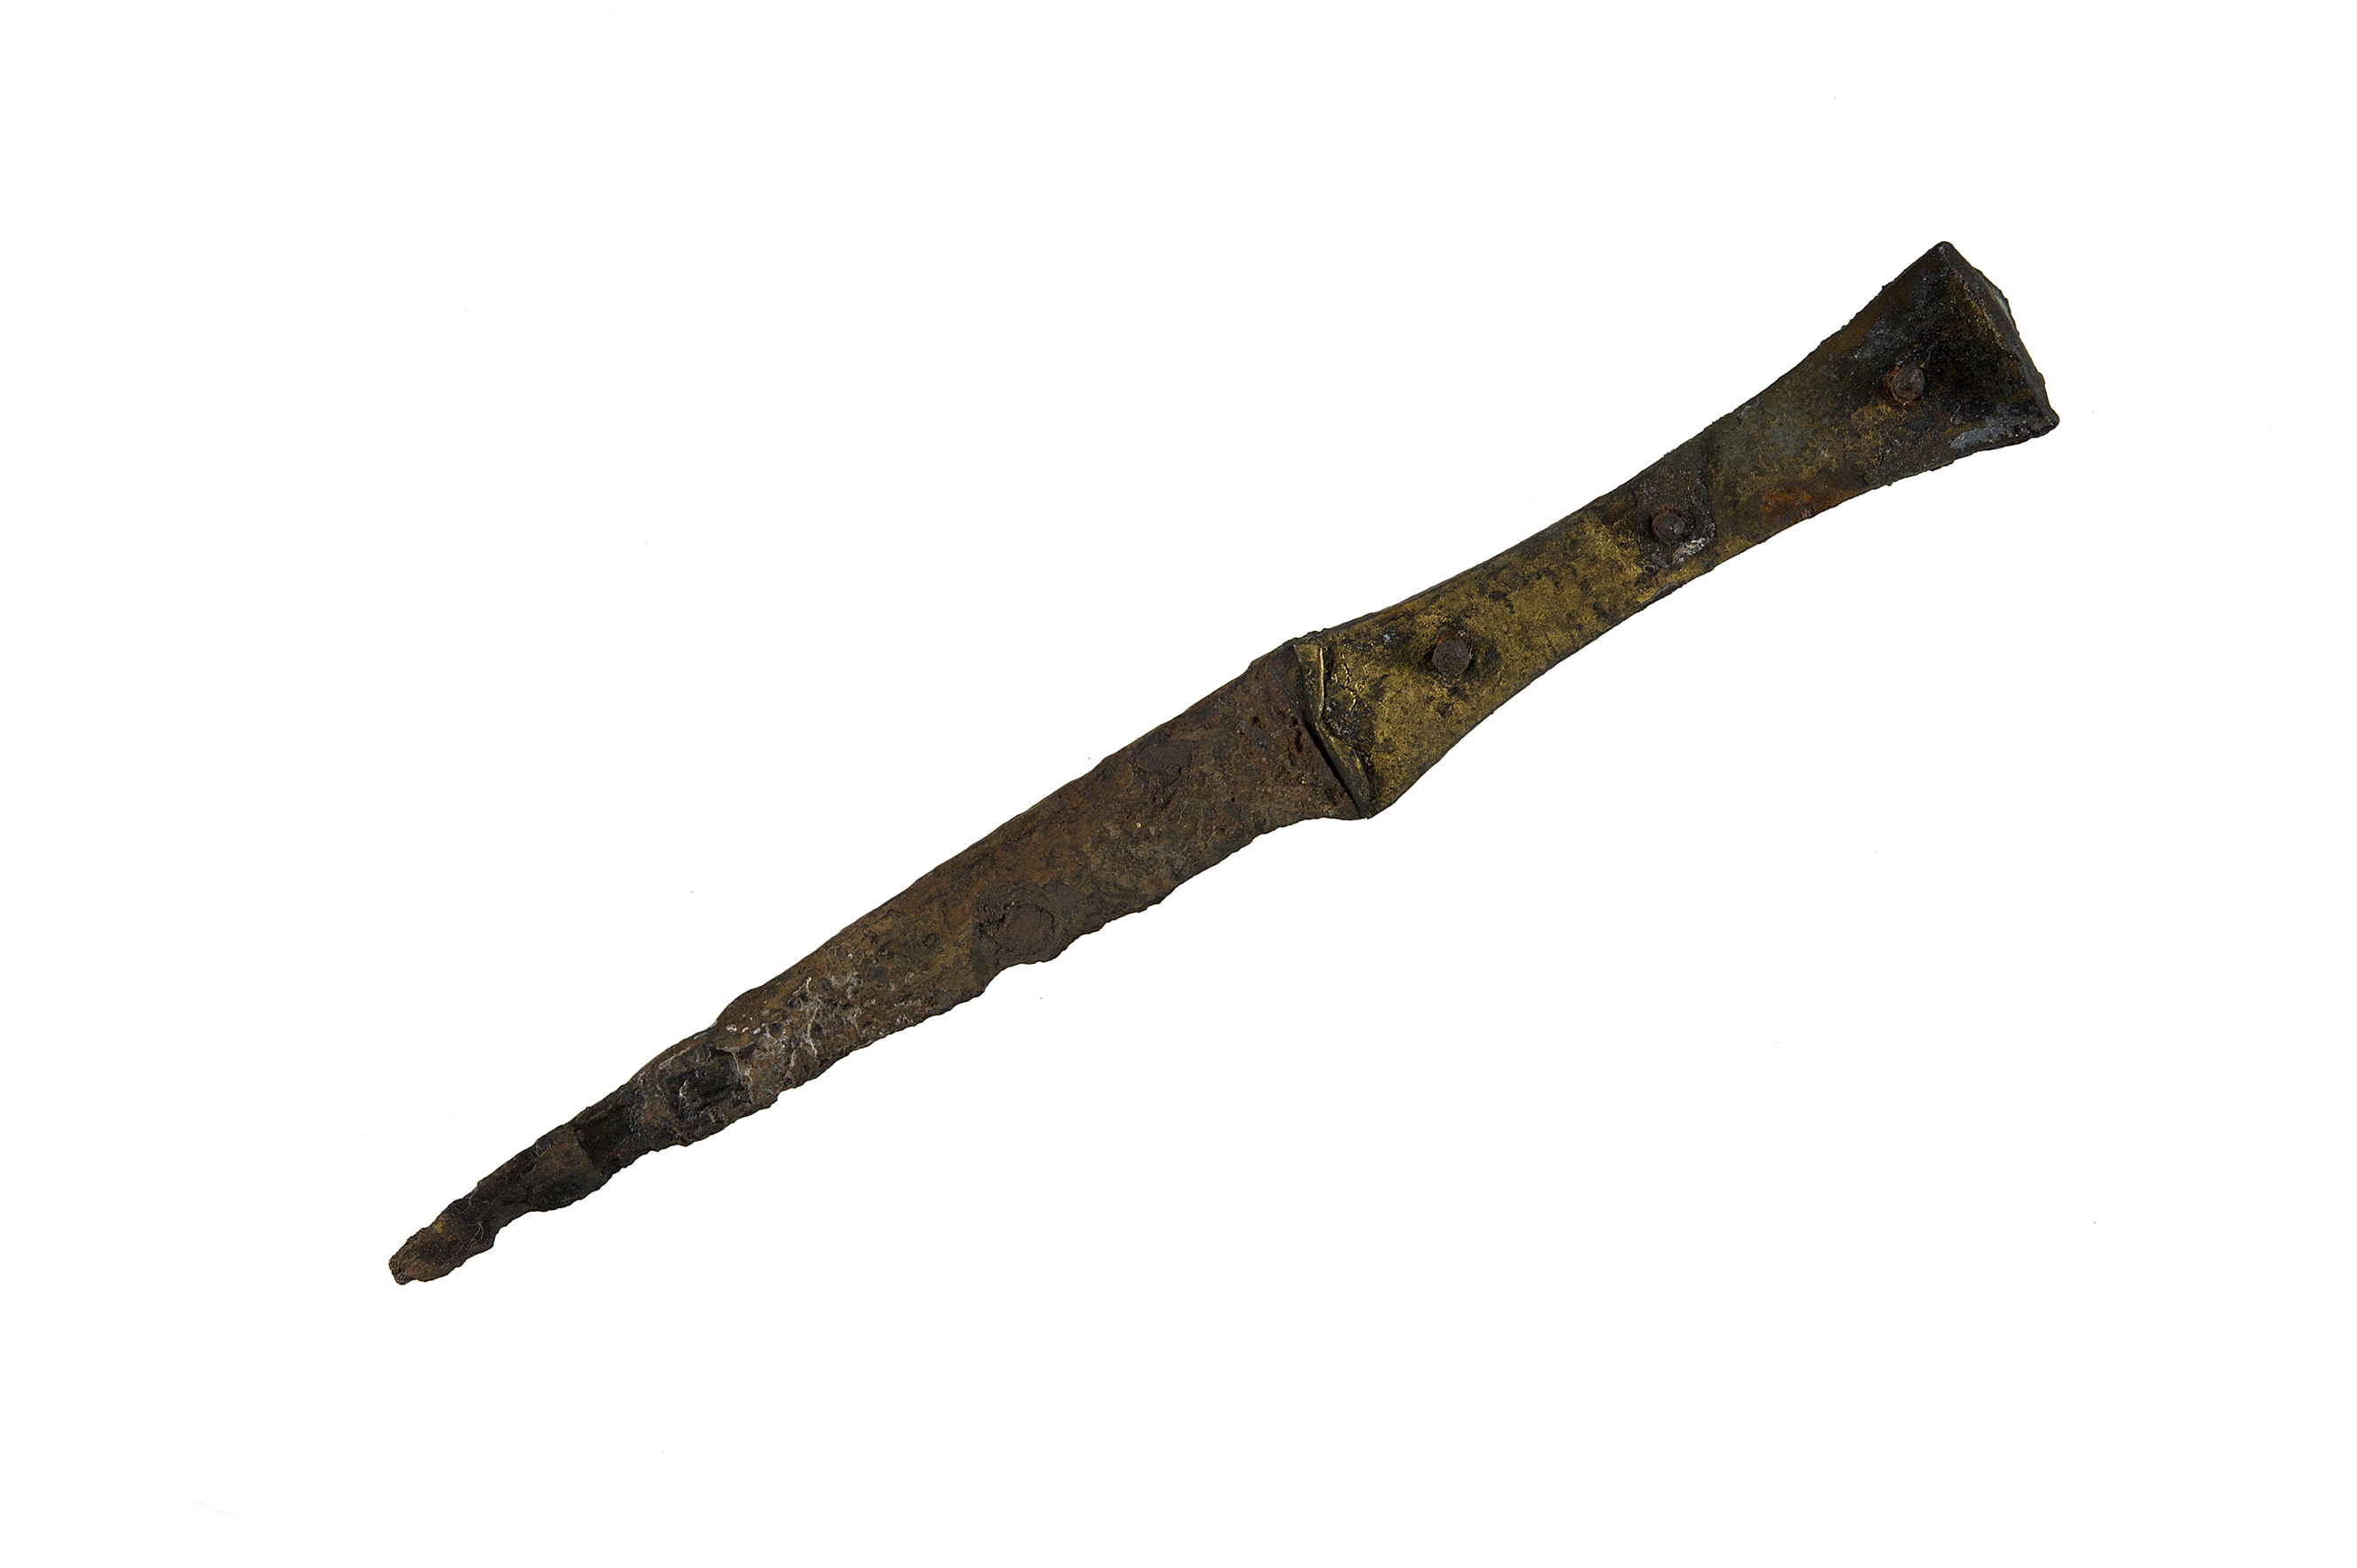 Roman knife from our archaeology collection